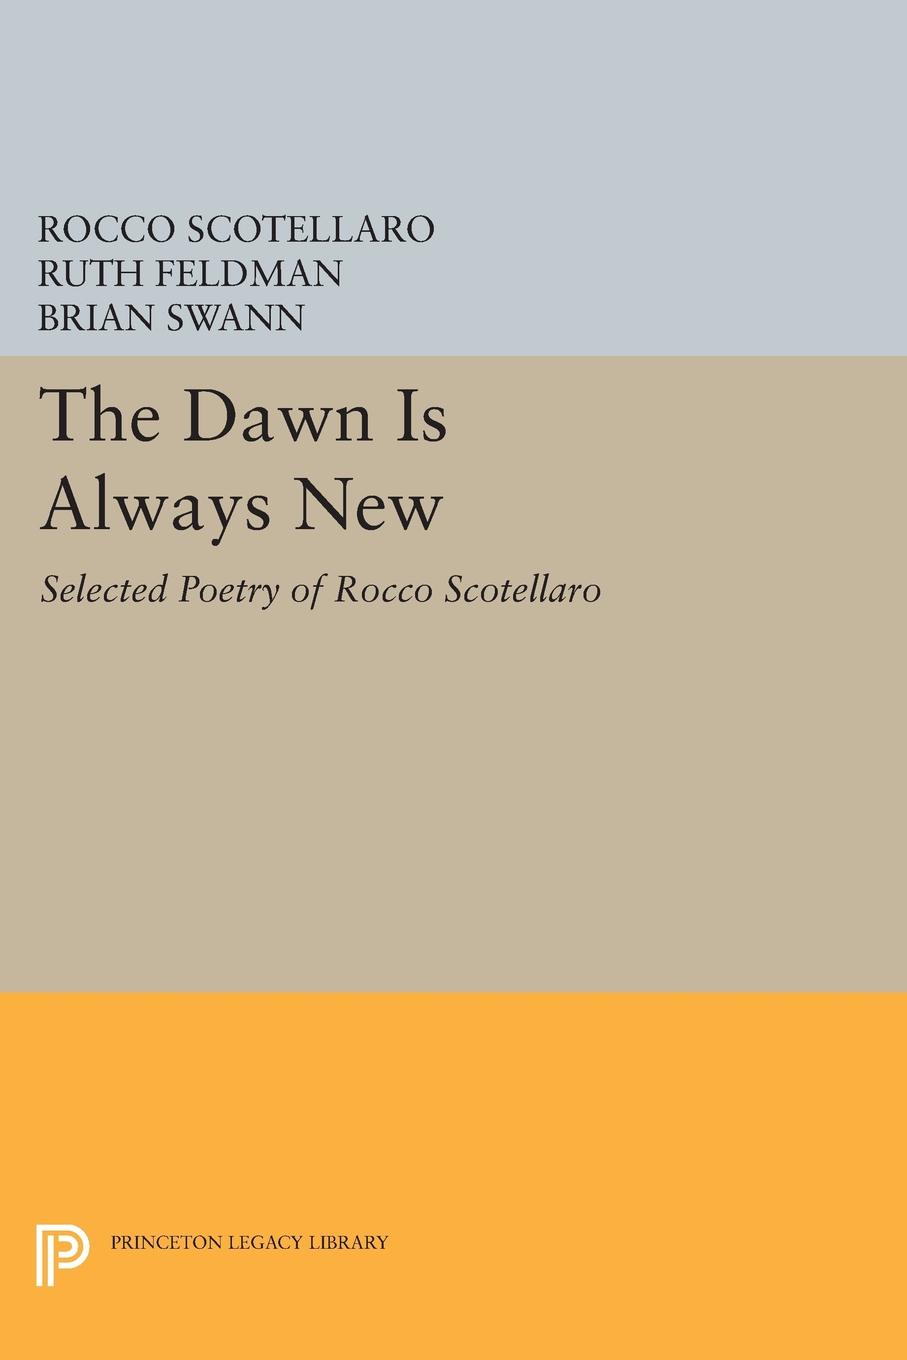 The Dawn is Always New. Selected Poetry of Rocco Scotellaro